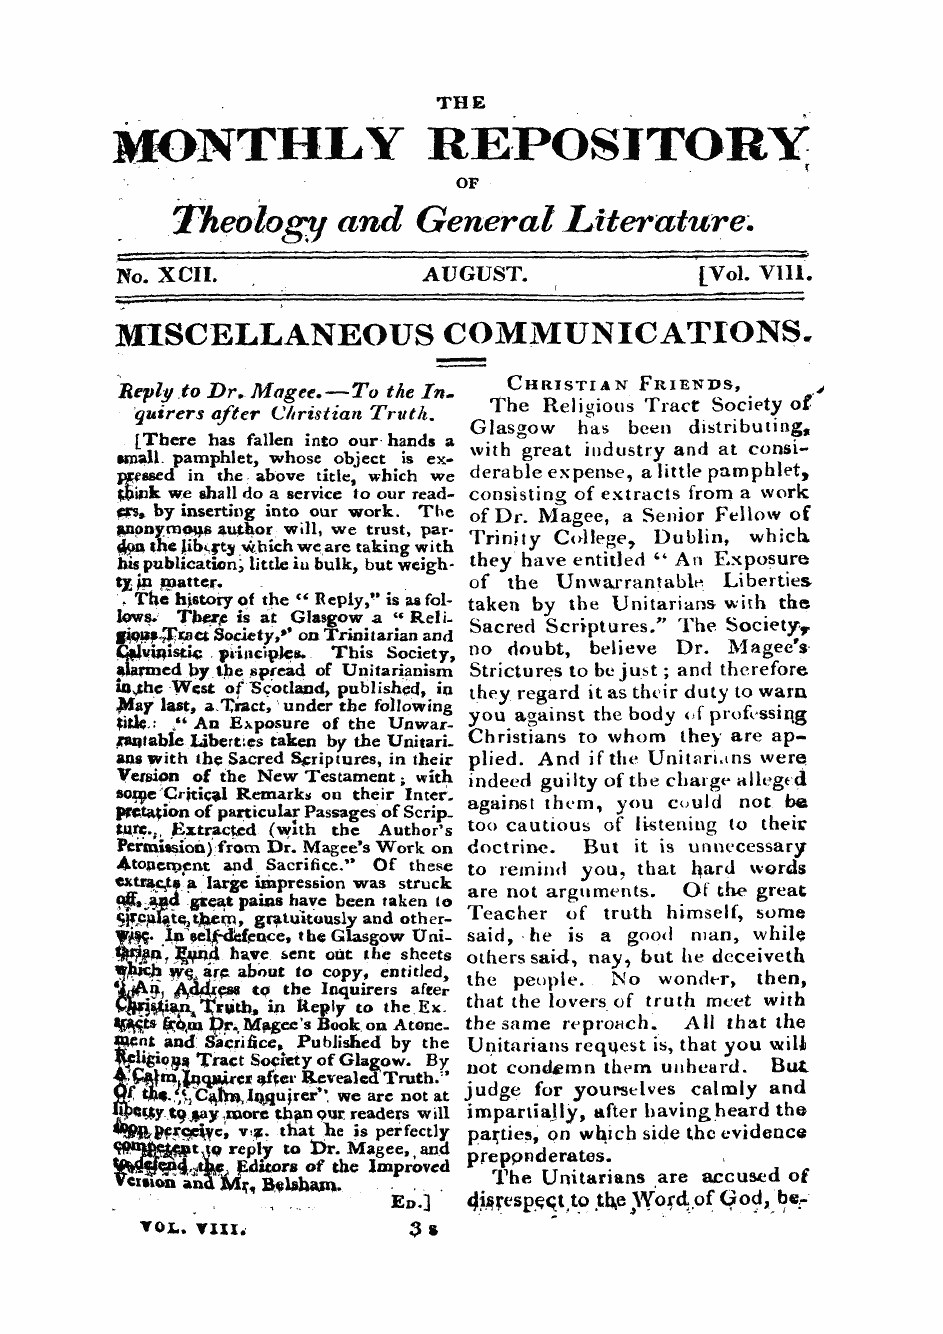 Monthly Repository (1806-1838) and Unitarian Chronicle (1832-1833): F Y, 1st edition - Miscellaneous Communications.